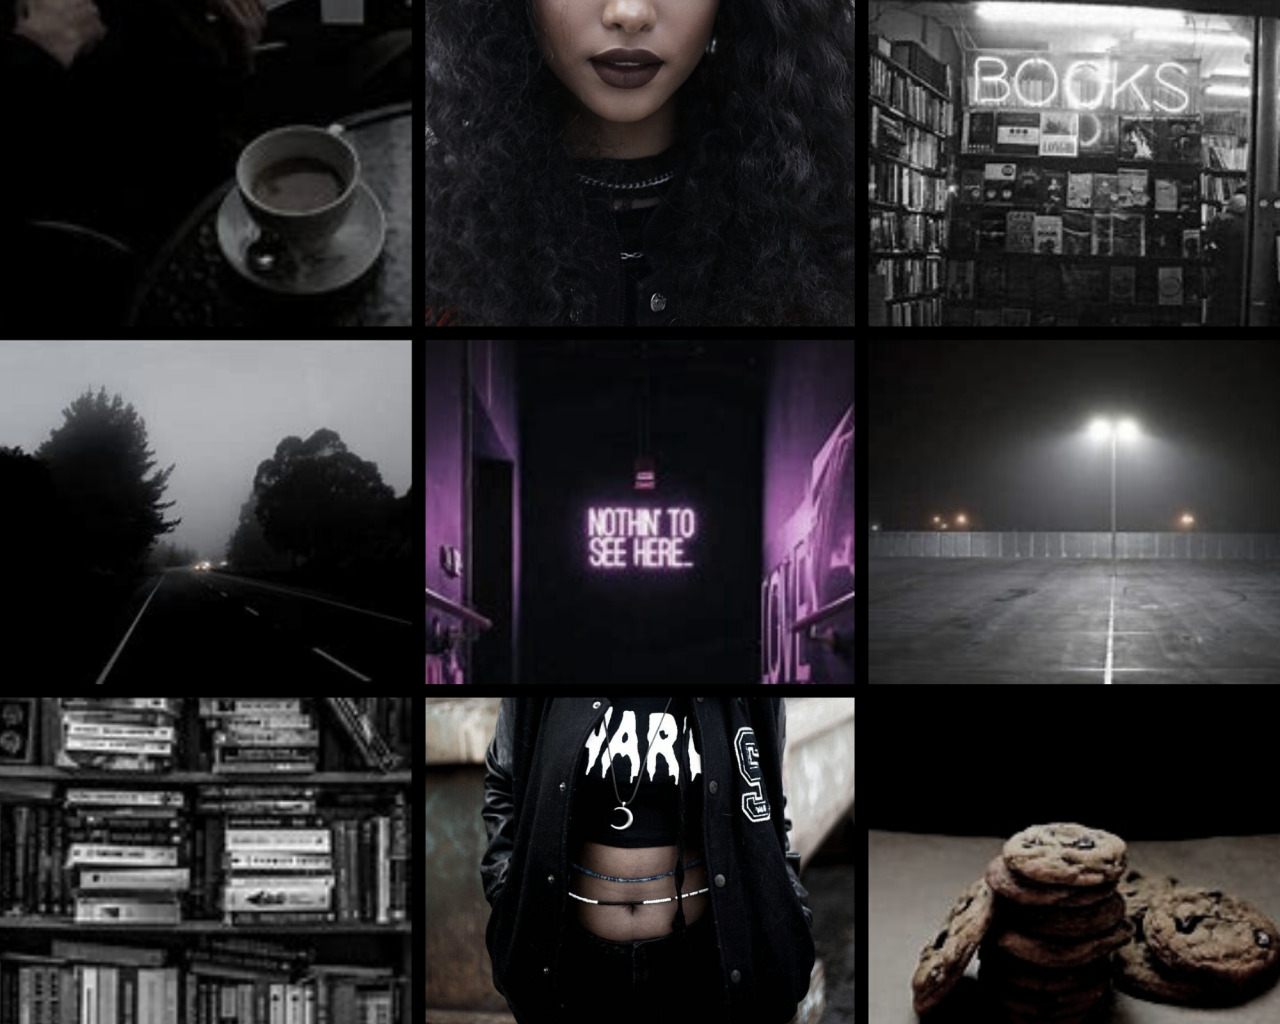 “Maybe if the world was kinder I would stop trying to run from it” Scorpio Sun, Virgo Moon, Gemini Rising, 3w4, INFP, Bisexual/Polyromantic, Loves the color black and reading. Requested by @bakagoddess #Scorpio Sun#Virgo Moon#Gemini Rising#3w4#INFP#Reading#Moodboard#Astrology#Astrology Moodboard #The Biseuxal and Polyromantic thing didnt really come through  #it was hard to include everything